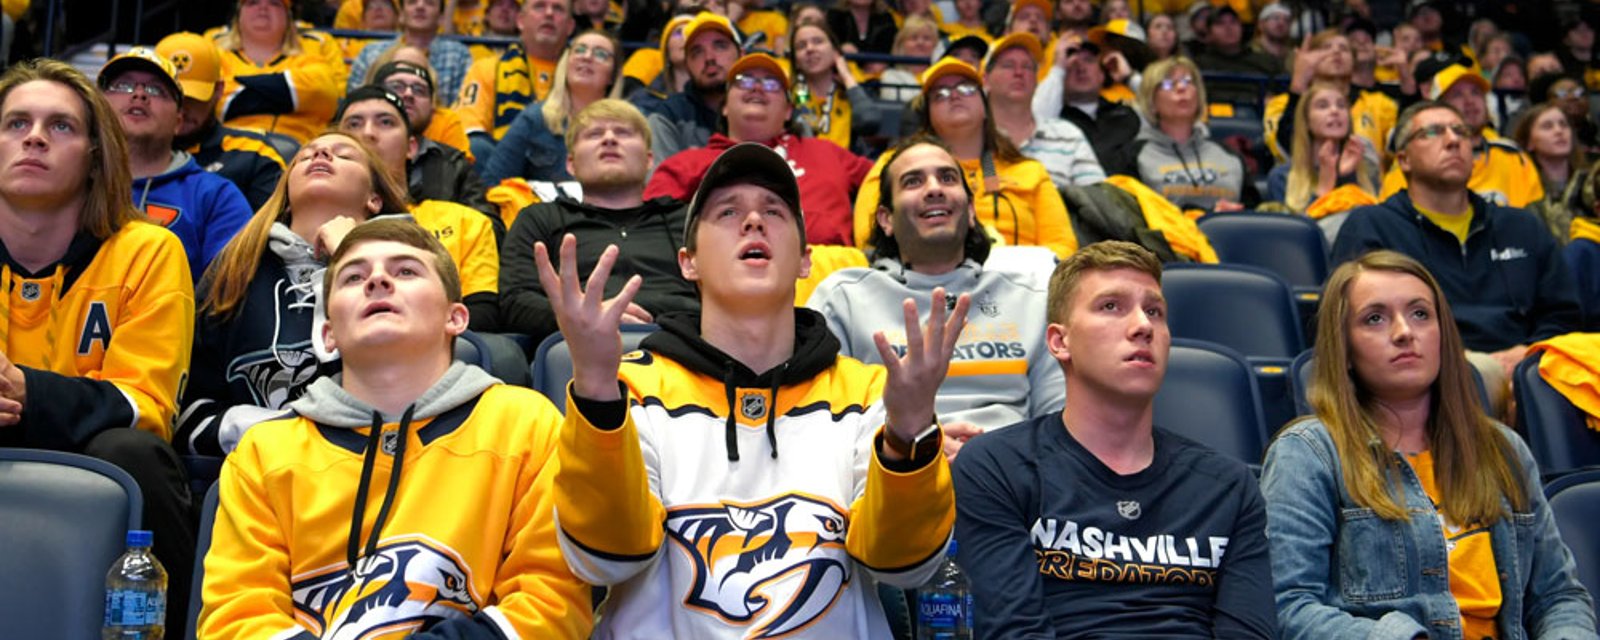 Predators fans not happy with reported coach hiring